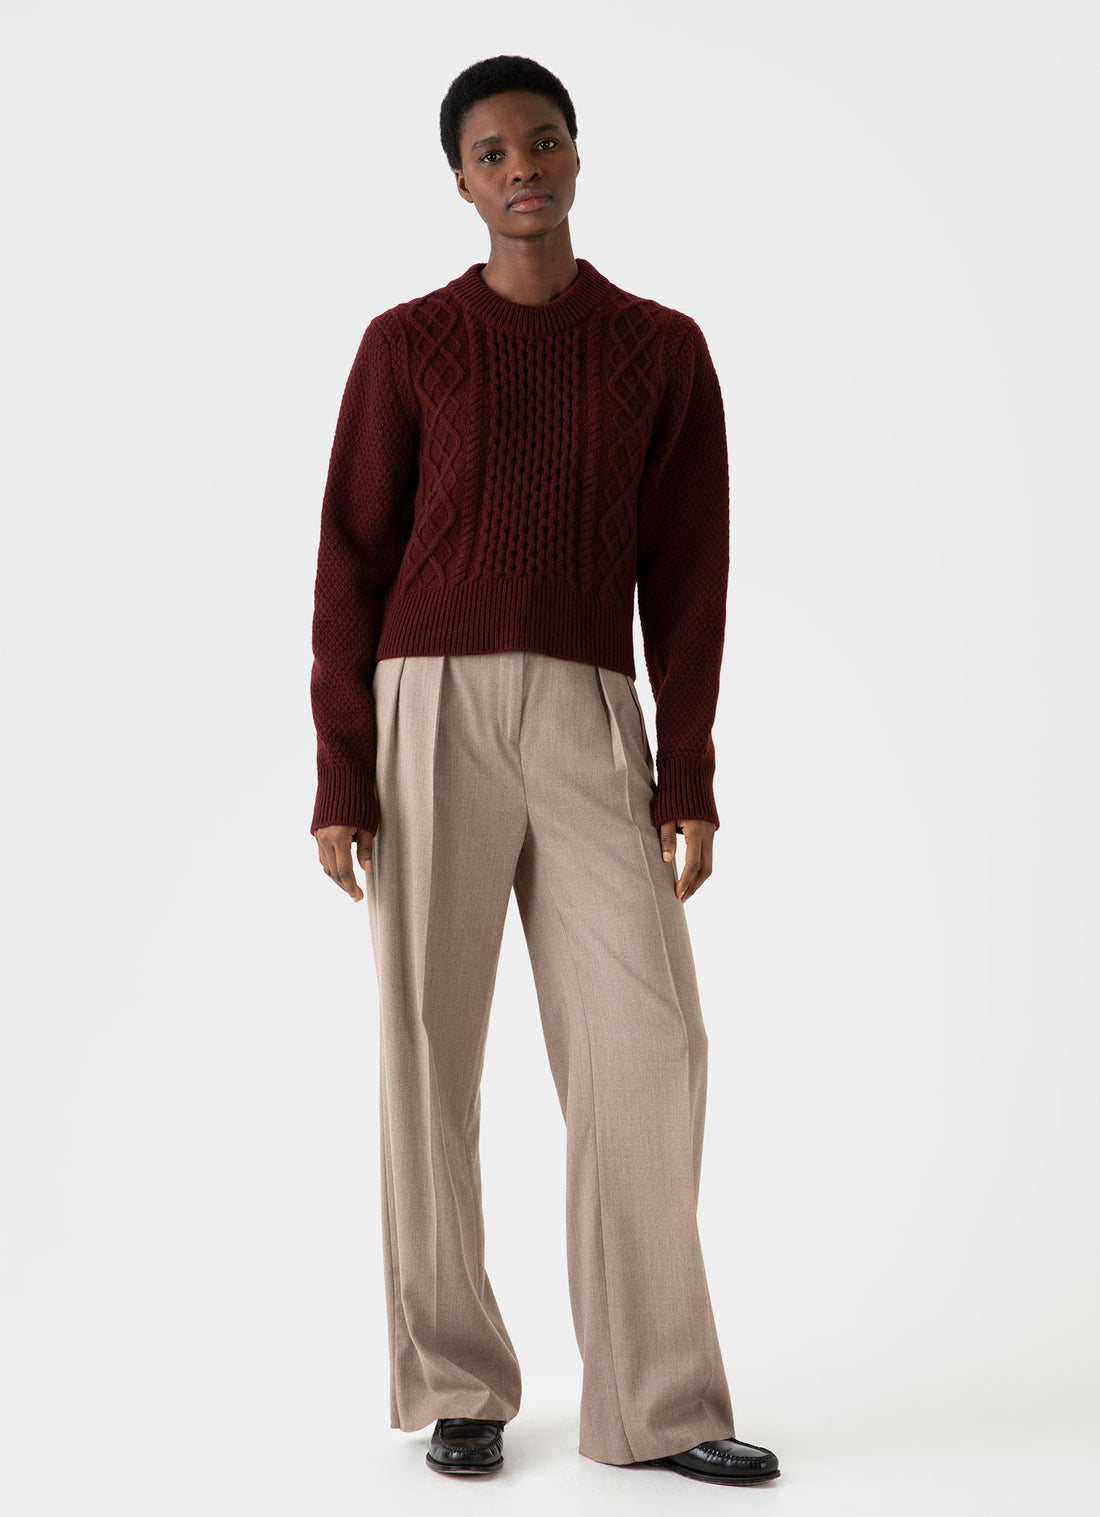 Women's Lambswool Cable Knit Jumper in Maroon